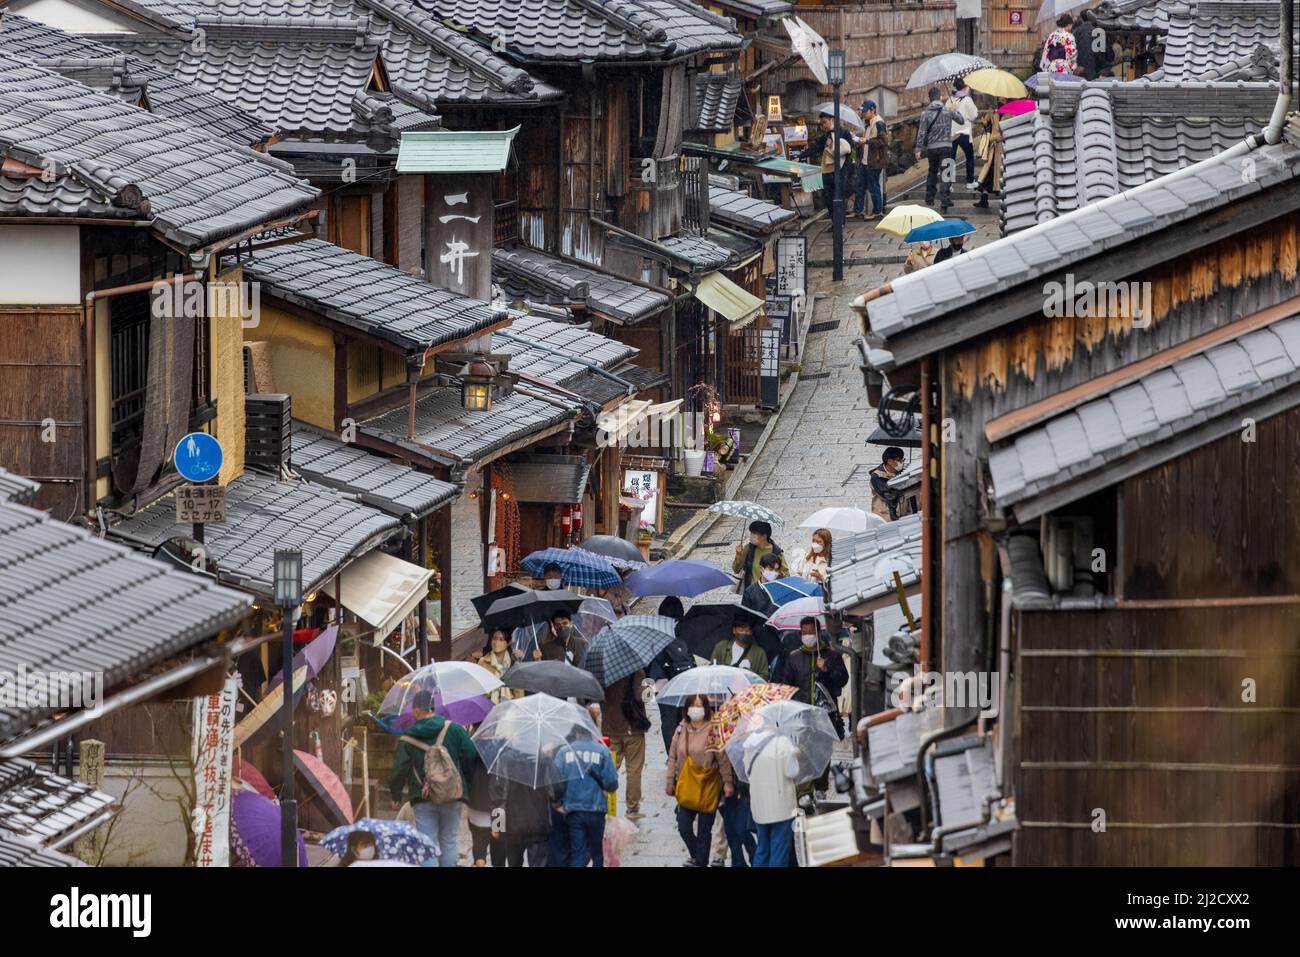 Overhead view of small crowd of people moving through history Kyoto district on rainy day Stock Photo